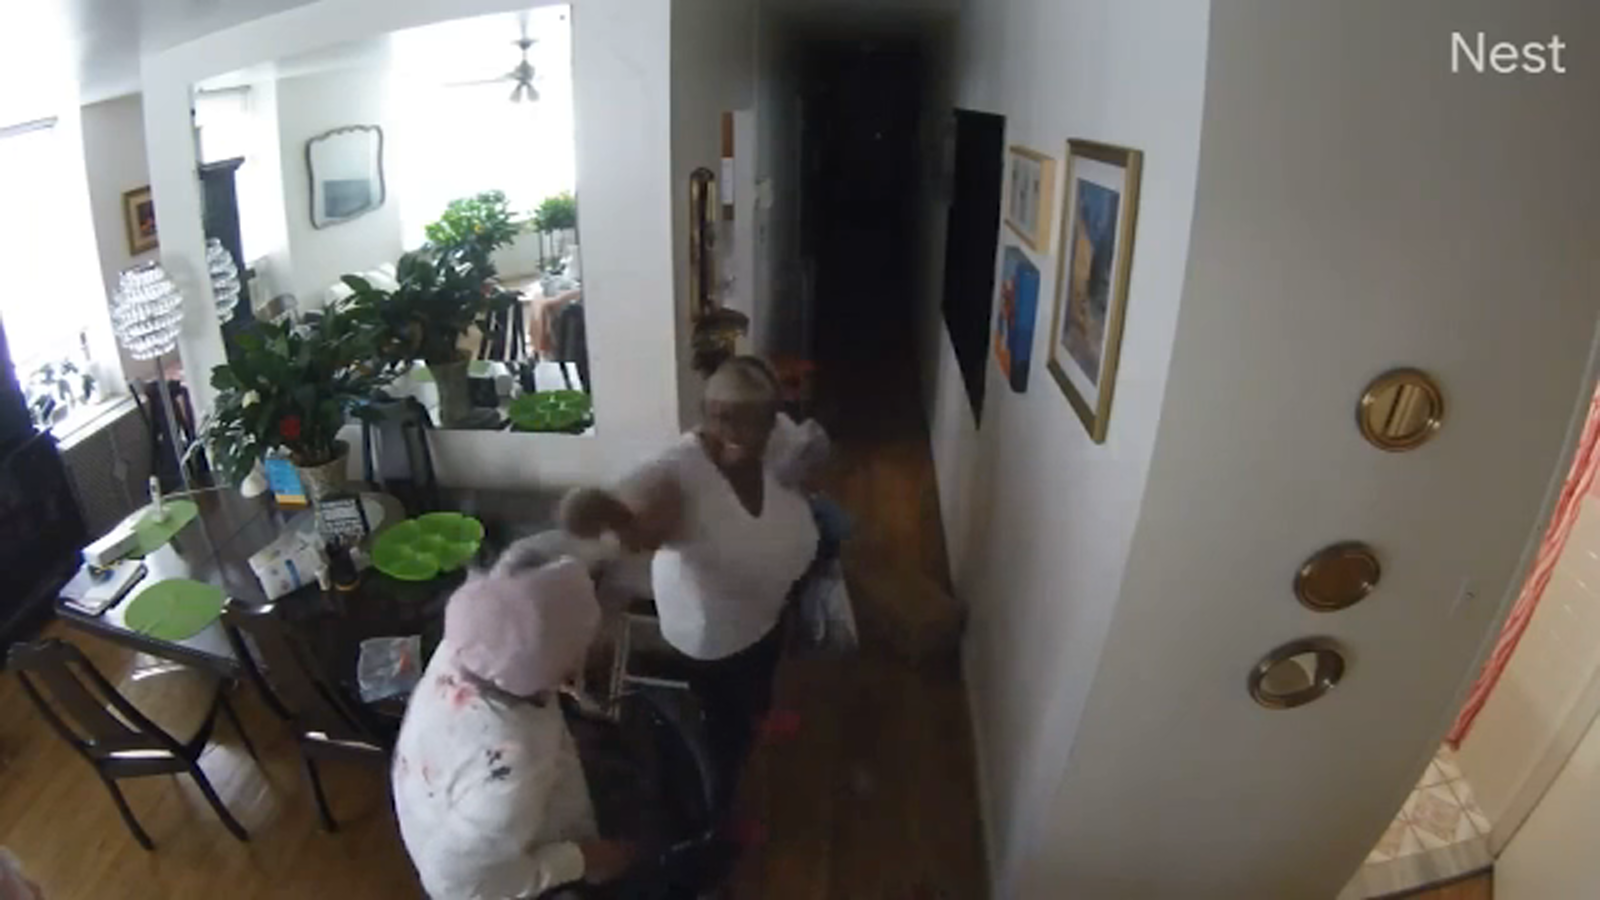 'A nightmare' - Disturbing video shows 95-year-old grandmother assaulted by home aide in Harlem